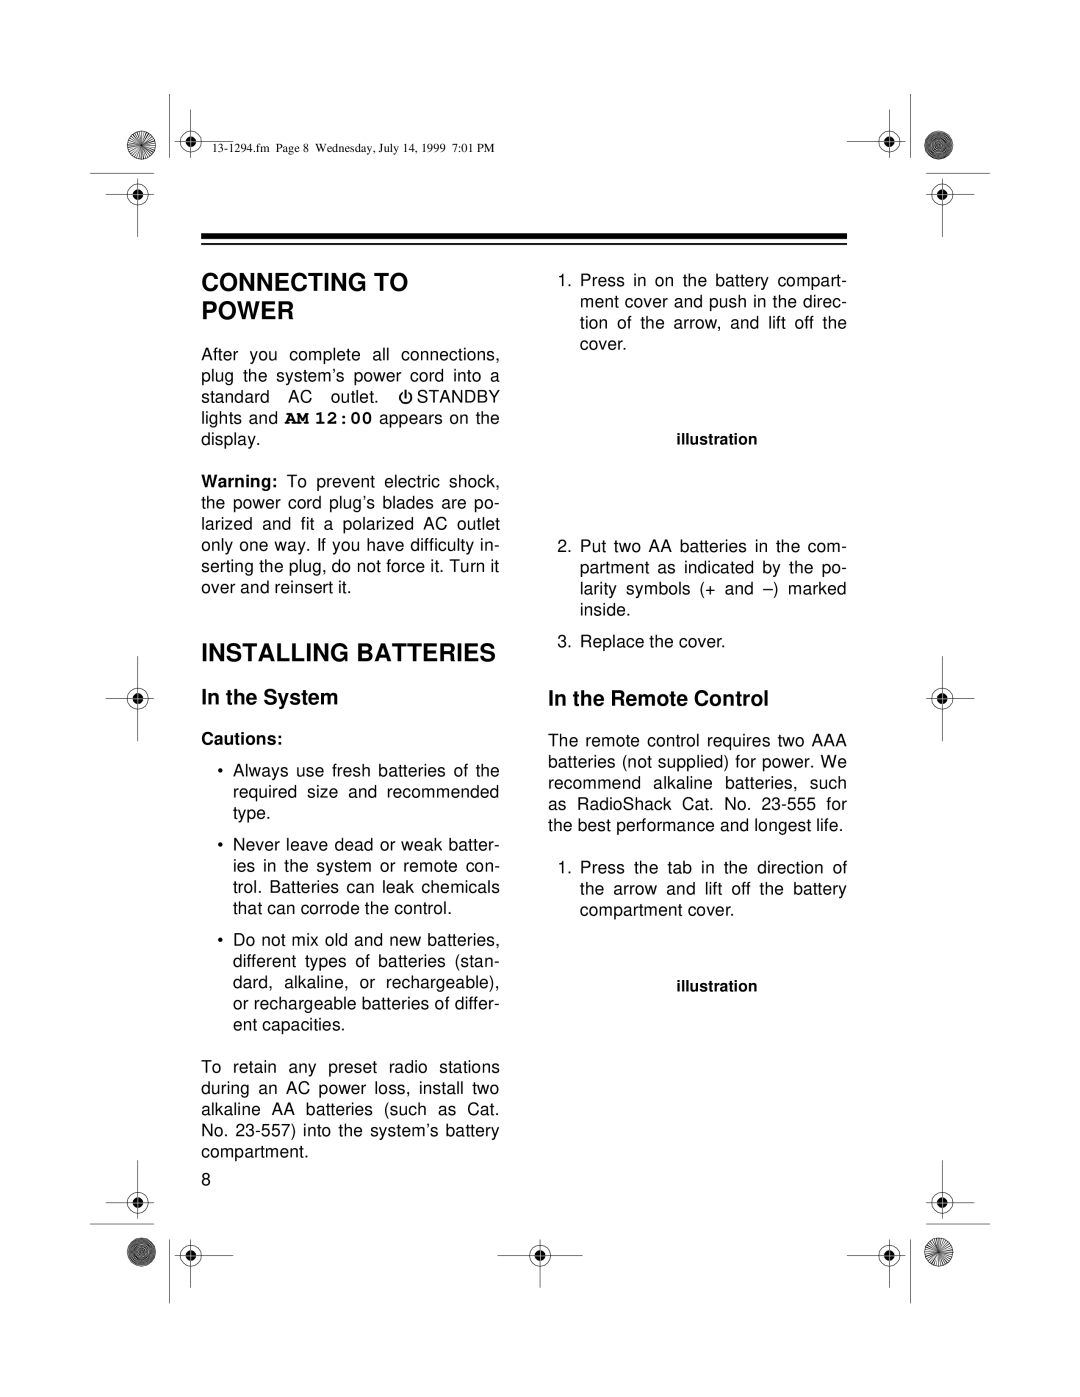 Optimus SYSTEM 746 owner manual Connecting To Power, Installing Batteries, In the System, In the Remote Control 